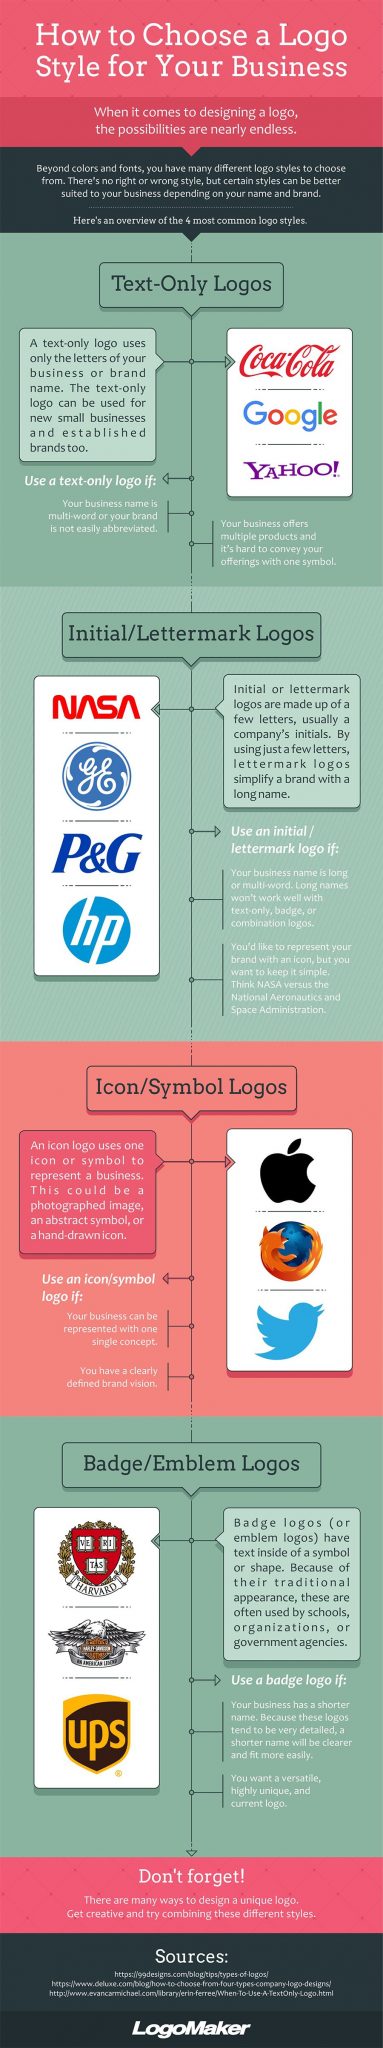 How-to-Choose-a-Logo-Style-for-Your-Business